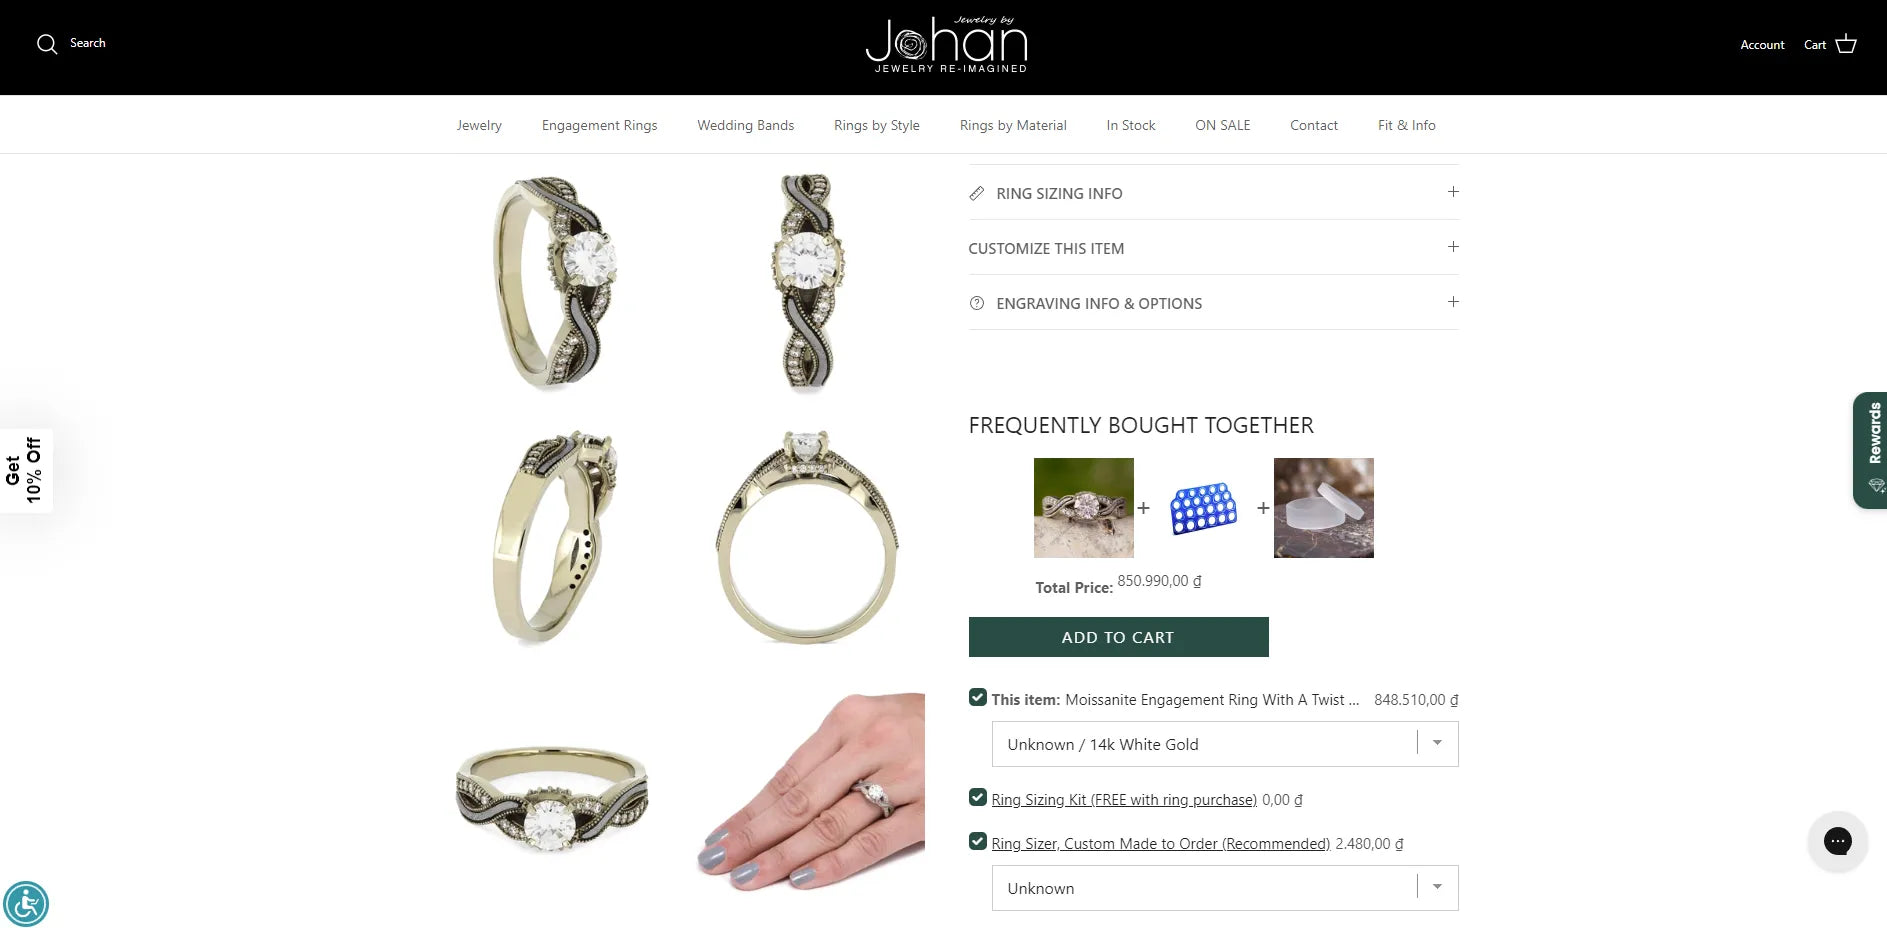 High-quality images of Johan’s Jewelry